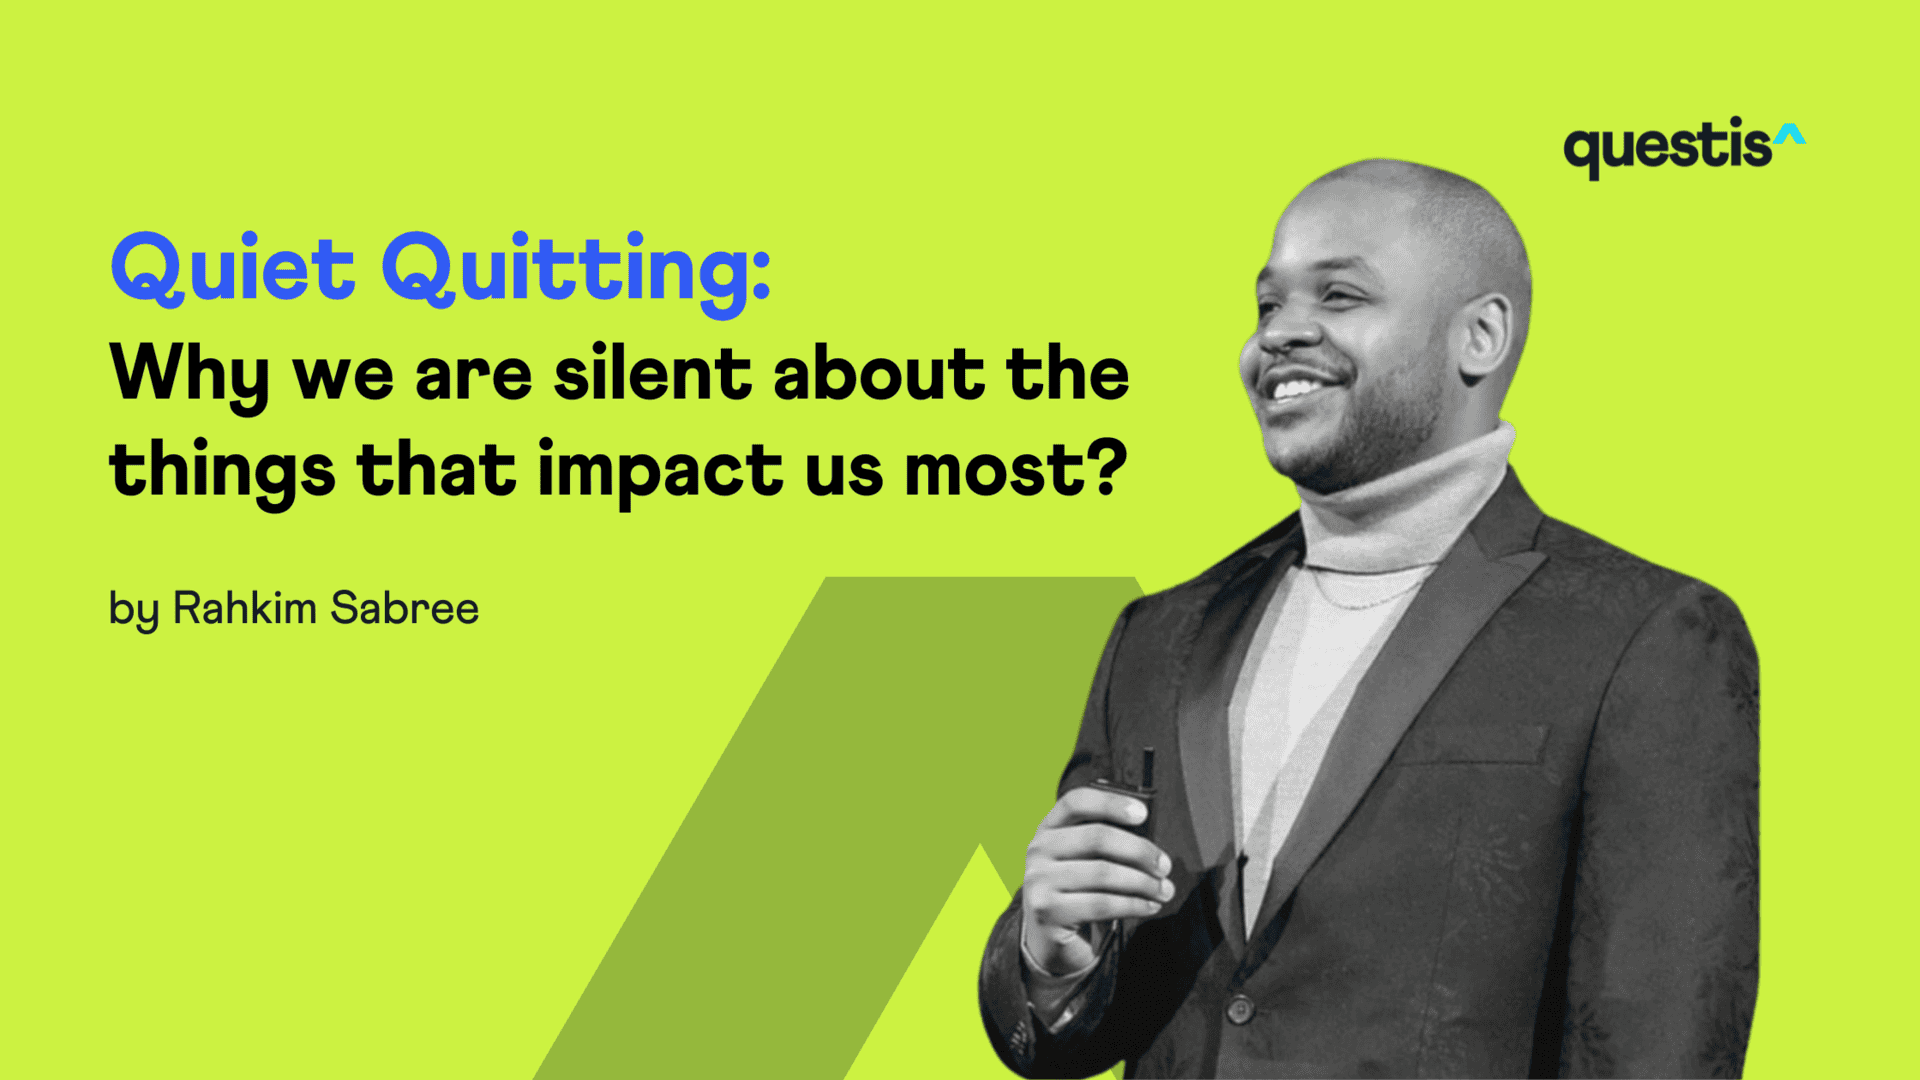 Quiet Quitting: Why we are silent about the things that impact us most?